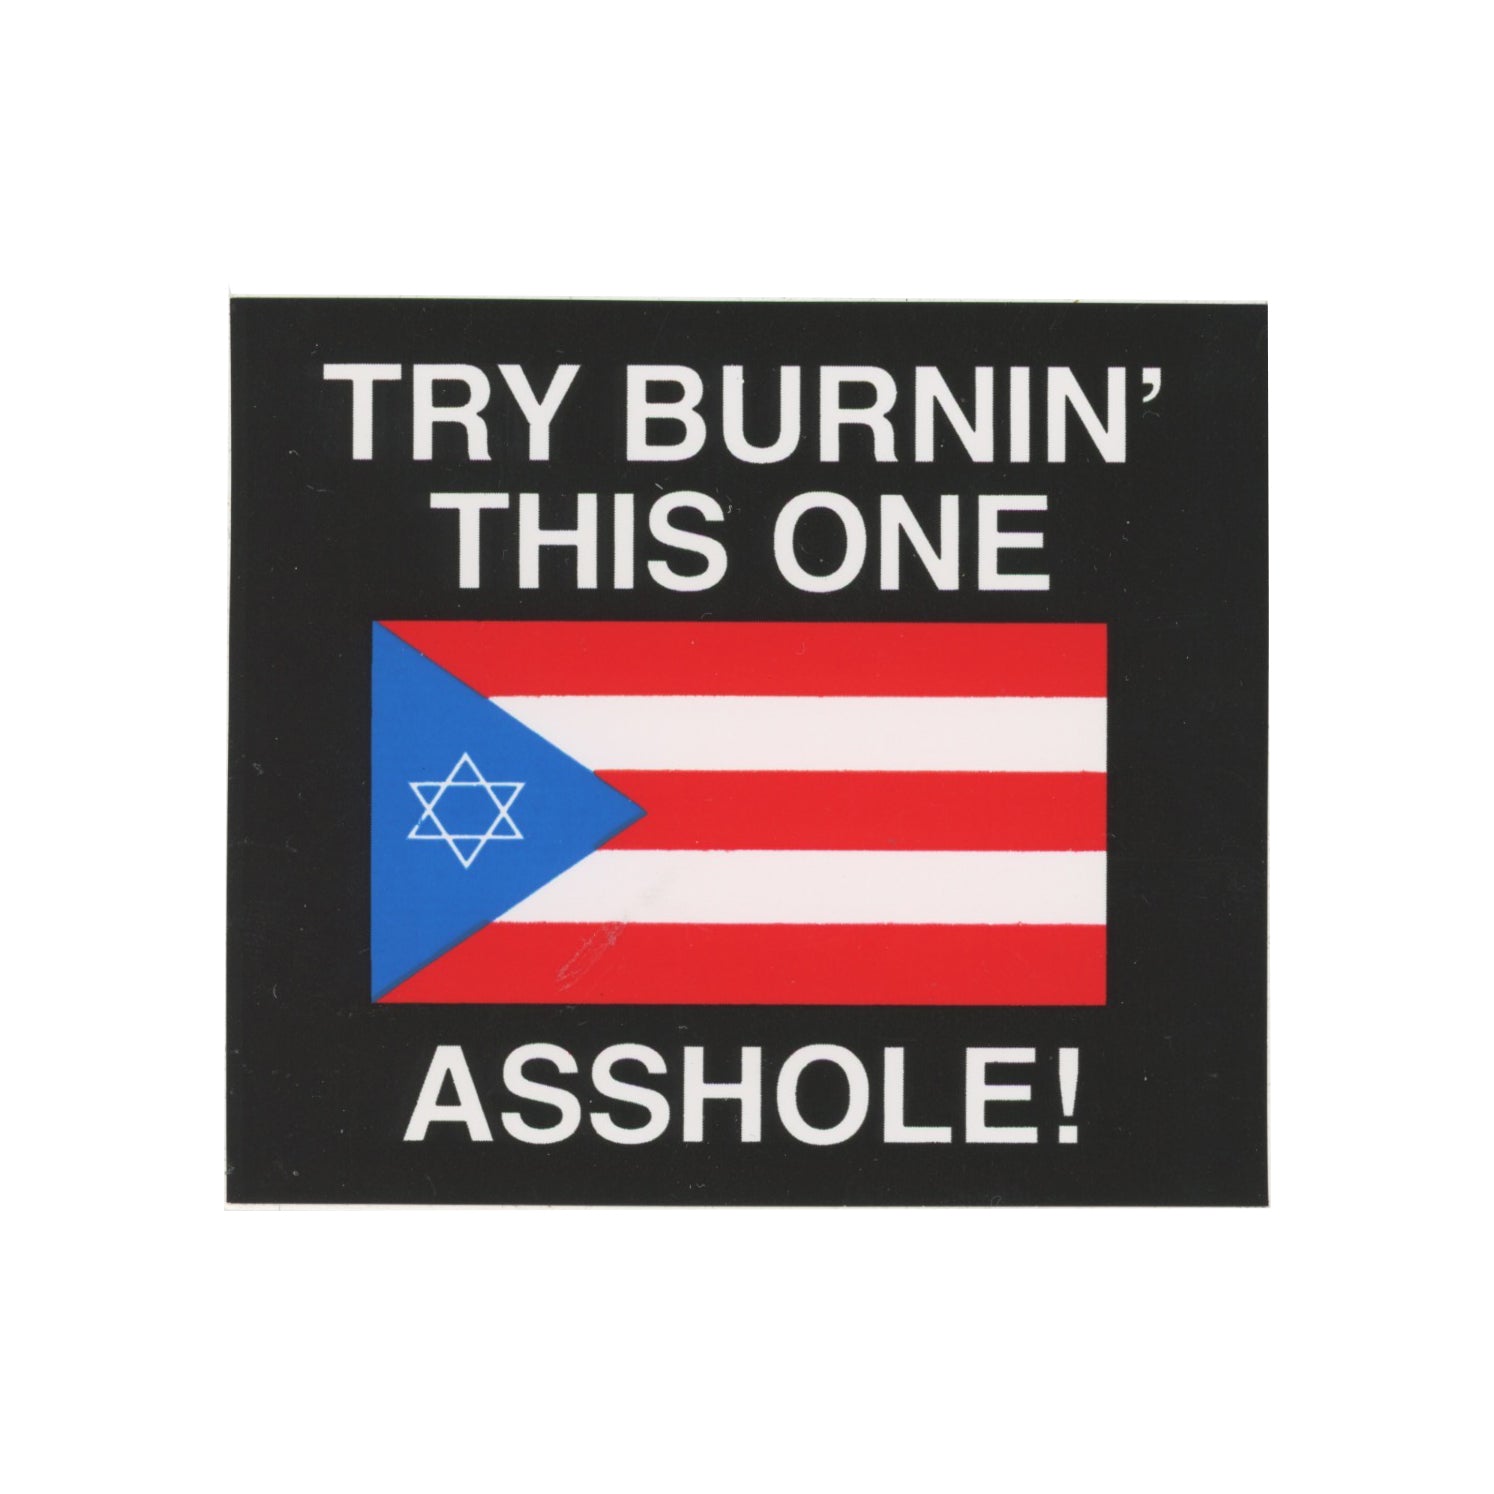 A NY Thing TRY BURNIN THIS ONE ASS HOLES Jewish Puerto Rican Flag Sticker